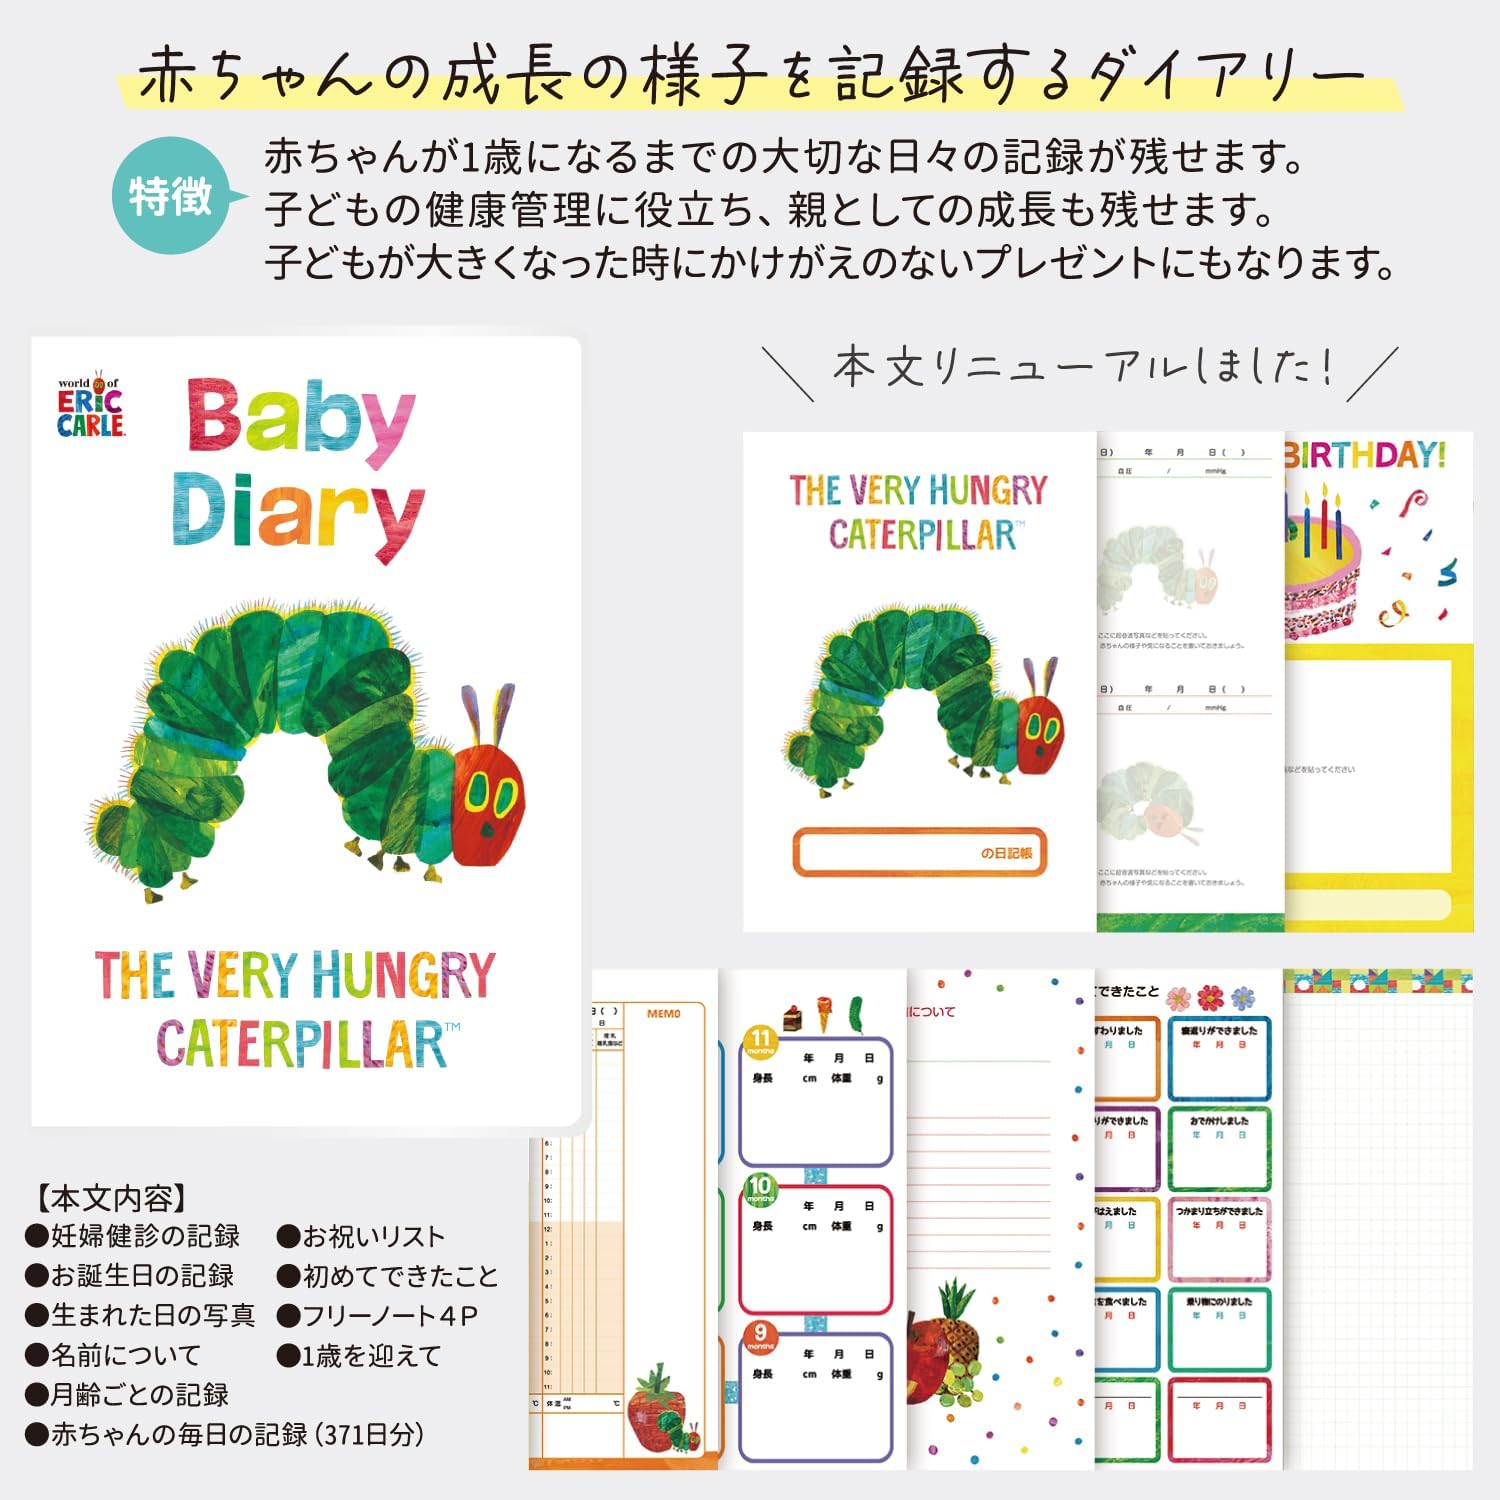  mail service free shipping childcare dia Lee (A5 size ) is ....... pocket pen .. attaching celebration of a birth childcare diary childcare record baby dia Lee eko - photograph 